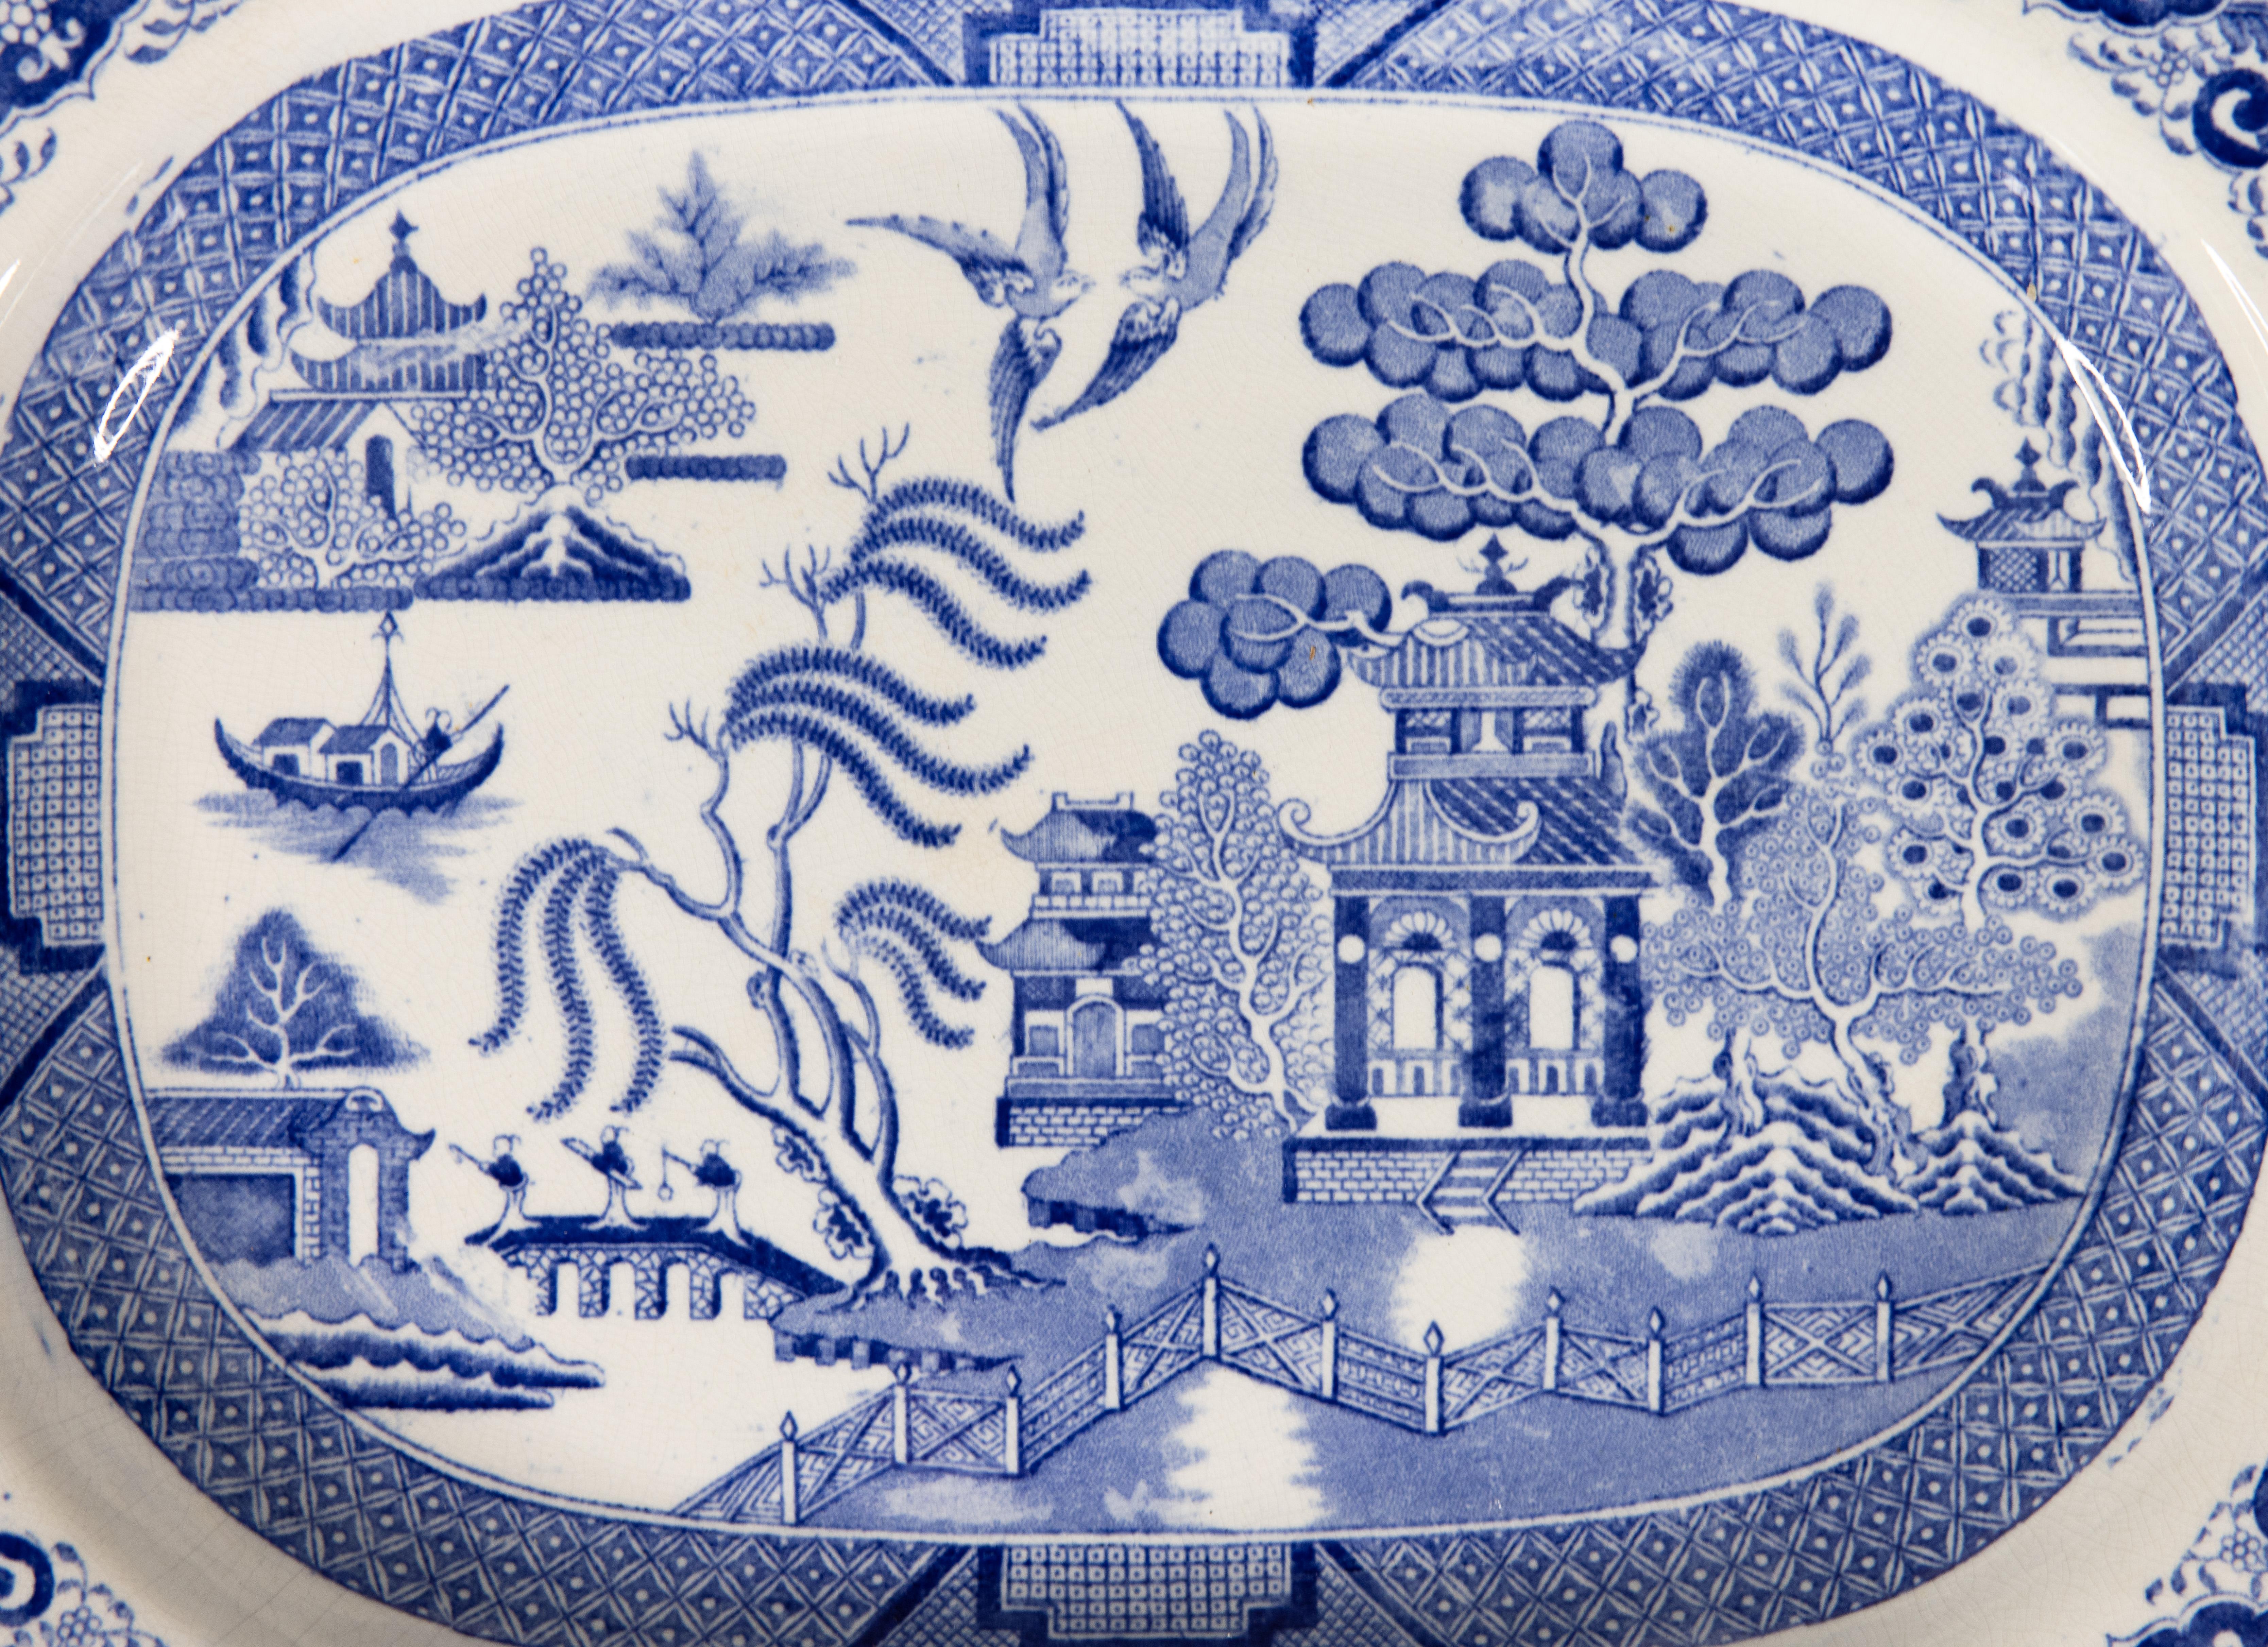 A superb 19th-Century English Staffordshire Chinoiserie transferware platter in the classic Blue Willow pattern, unmarked. This lovely platter is a nice large size and would be perfect for serving or display.